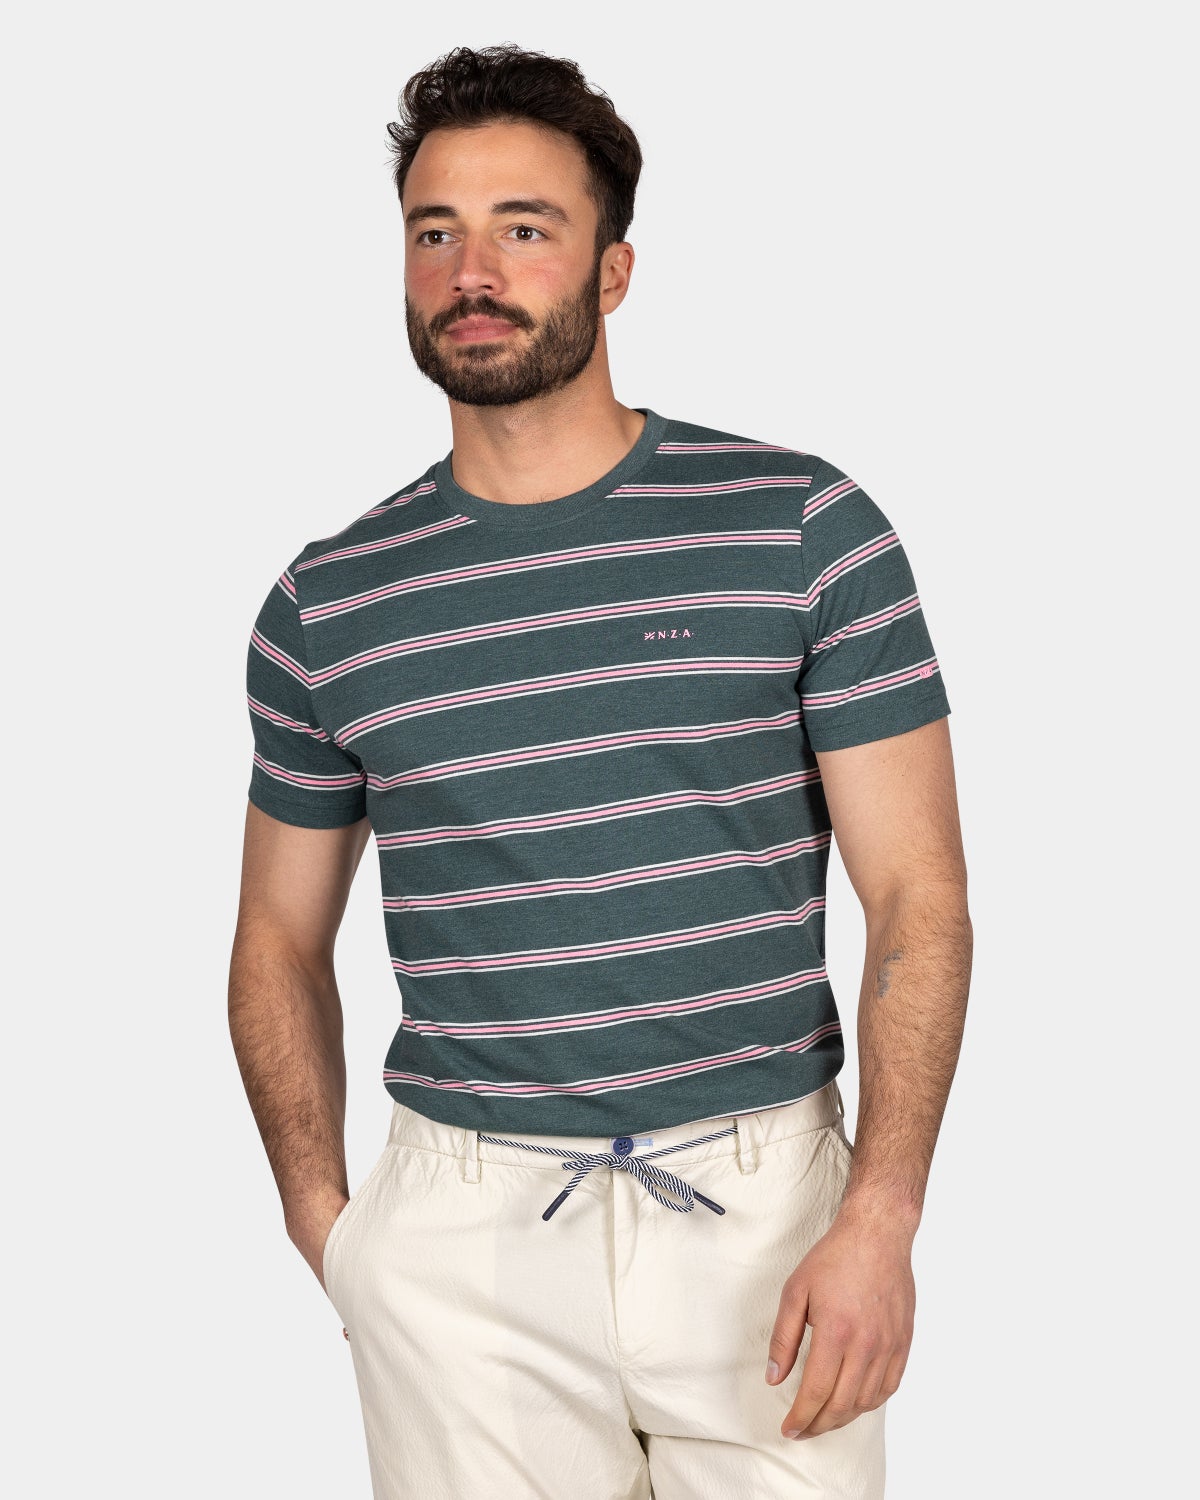 Green t-shirt with orange stripes - Classic Green